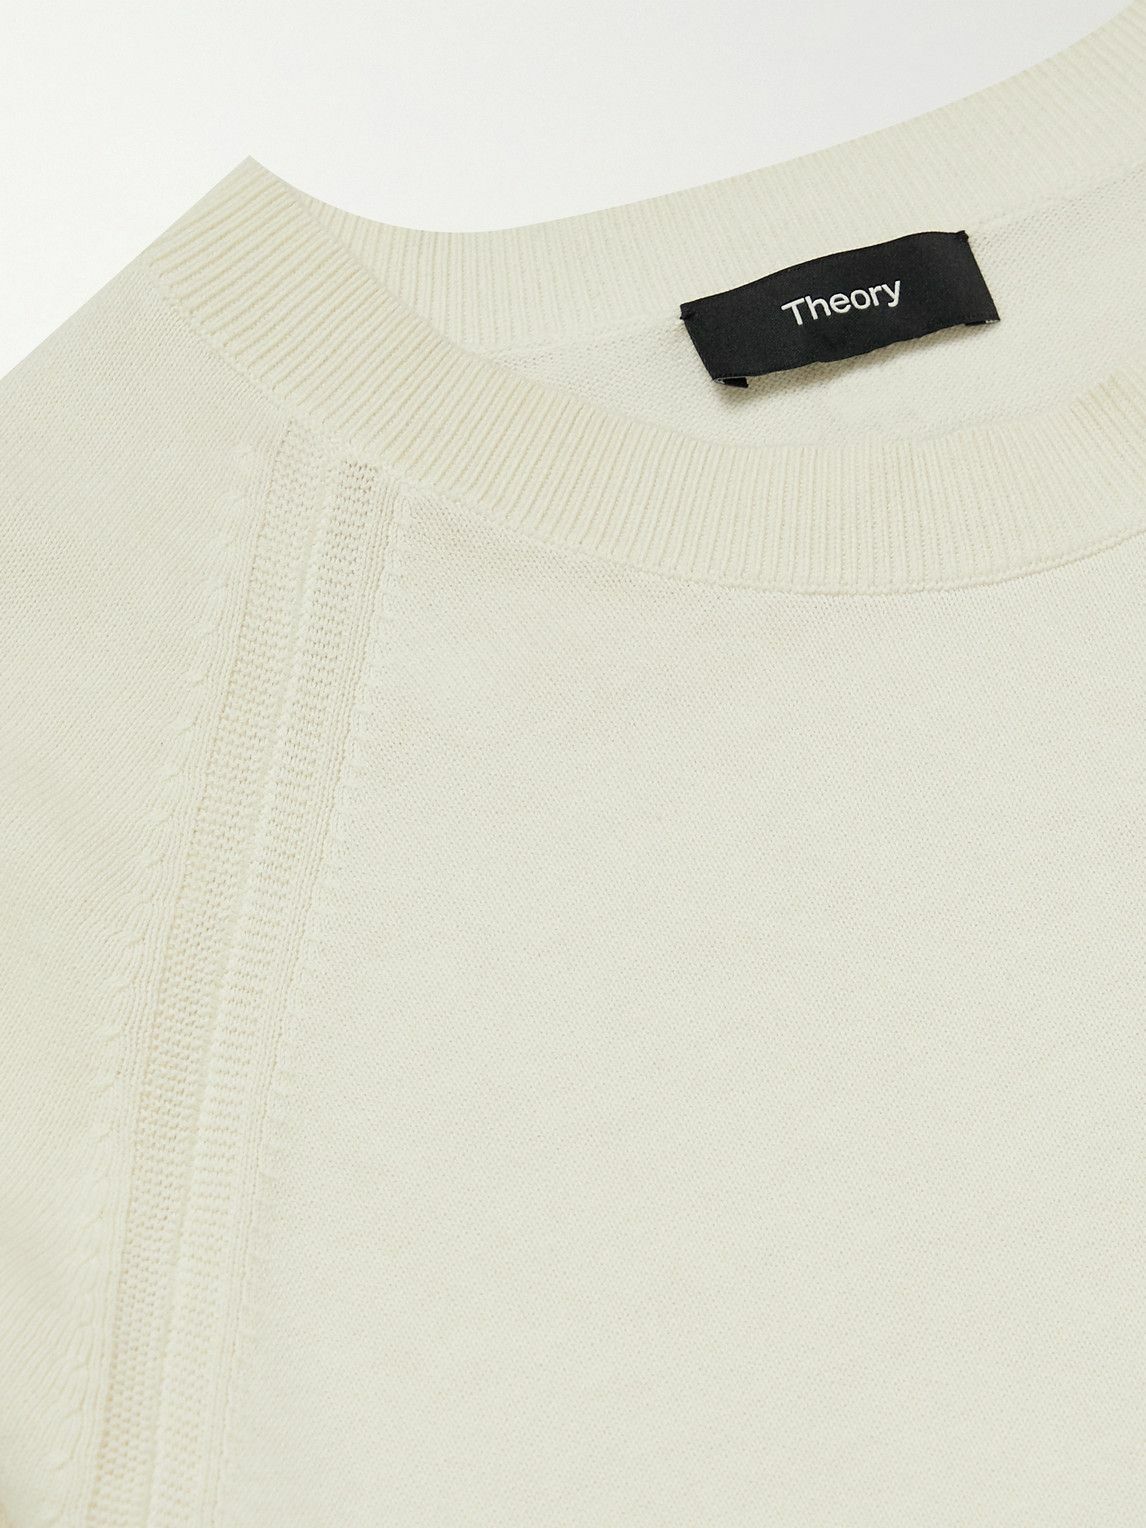 Theory - Jaipur Cotton-Blend Sweater - Neutrals Theory